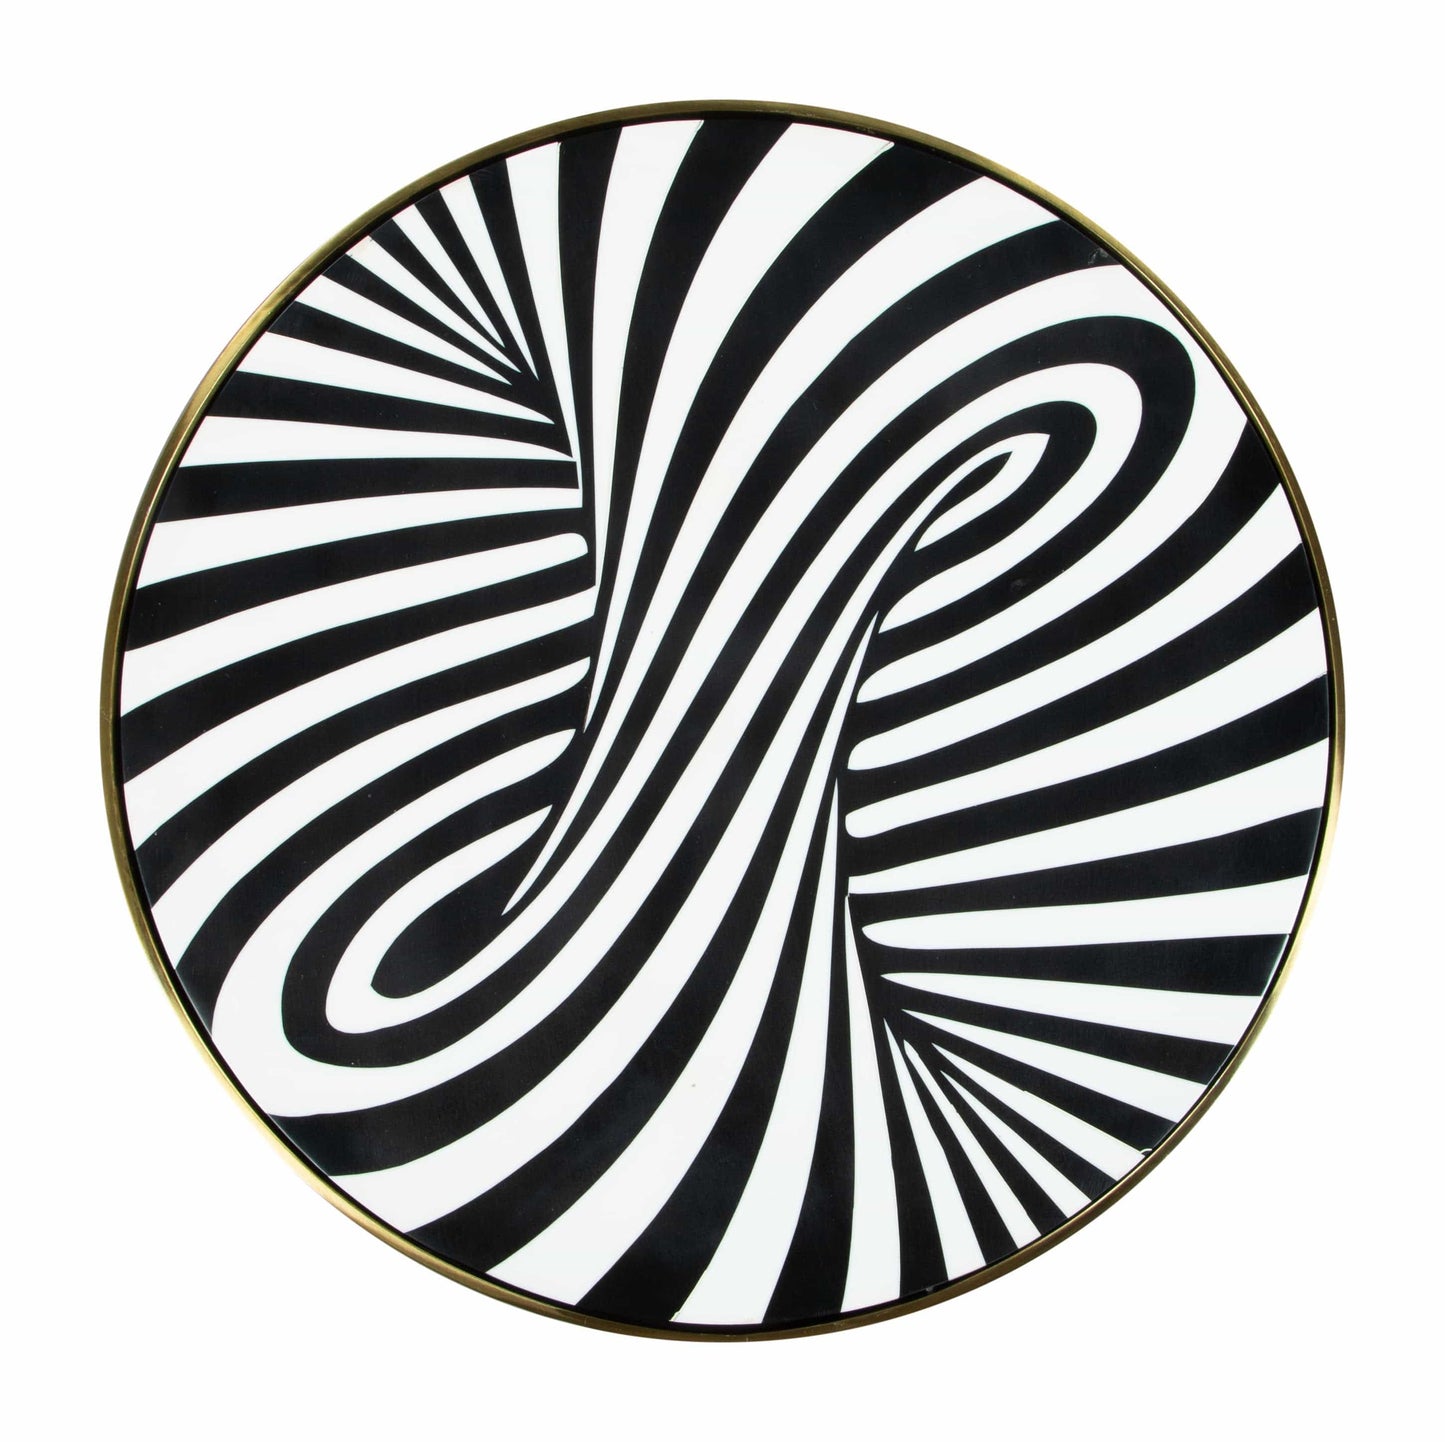 Top from above showing swirl design